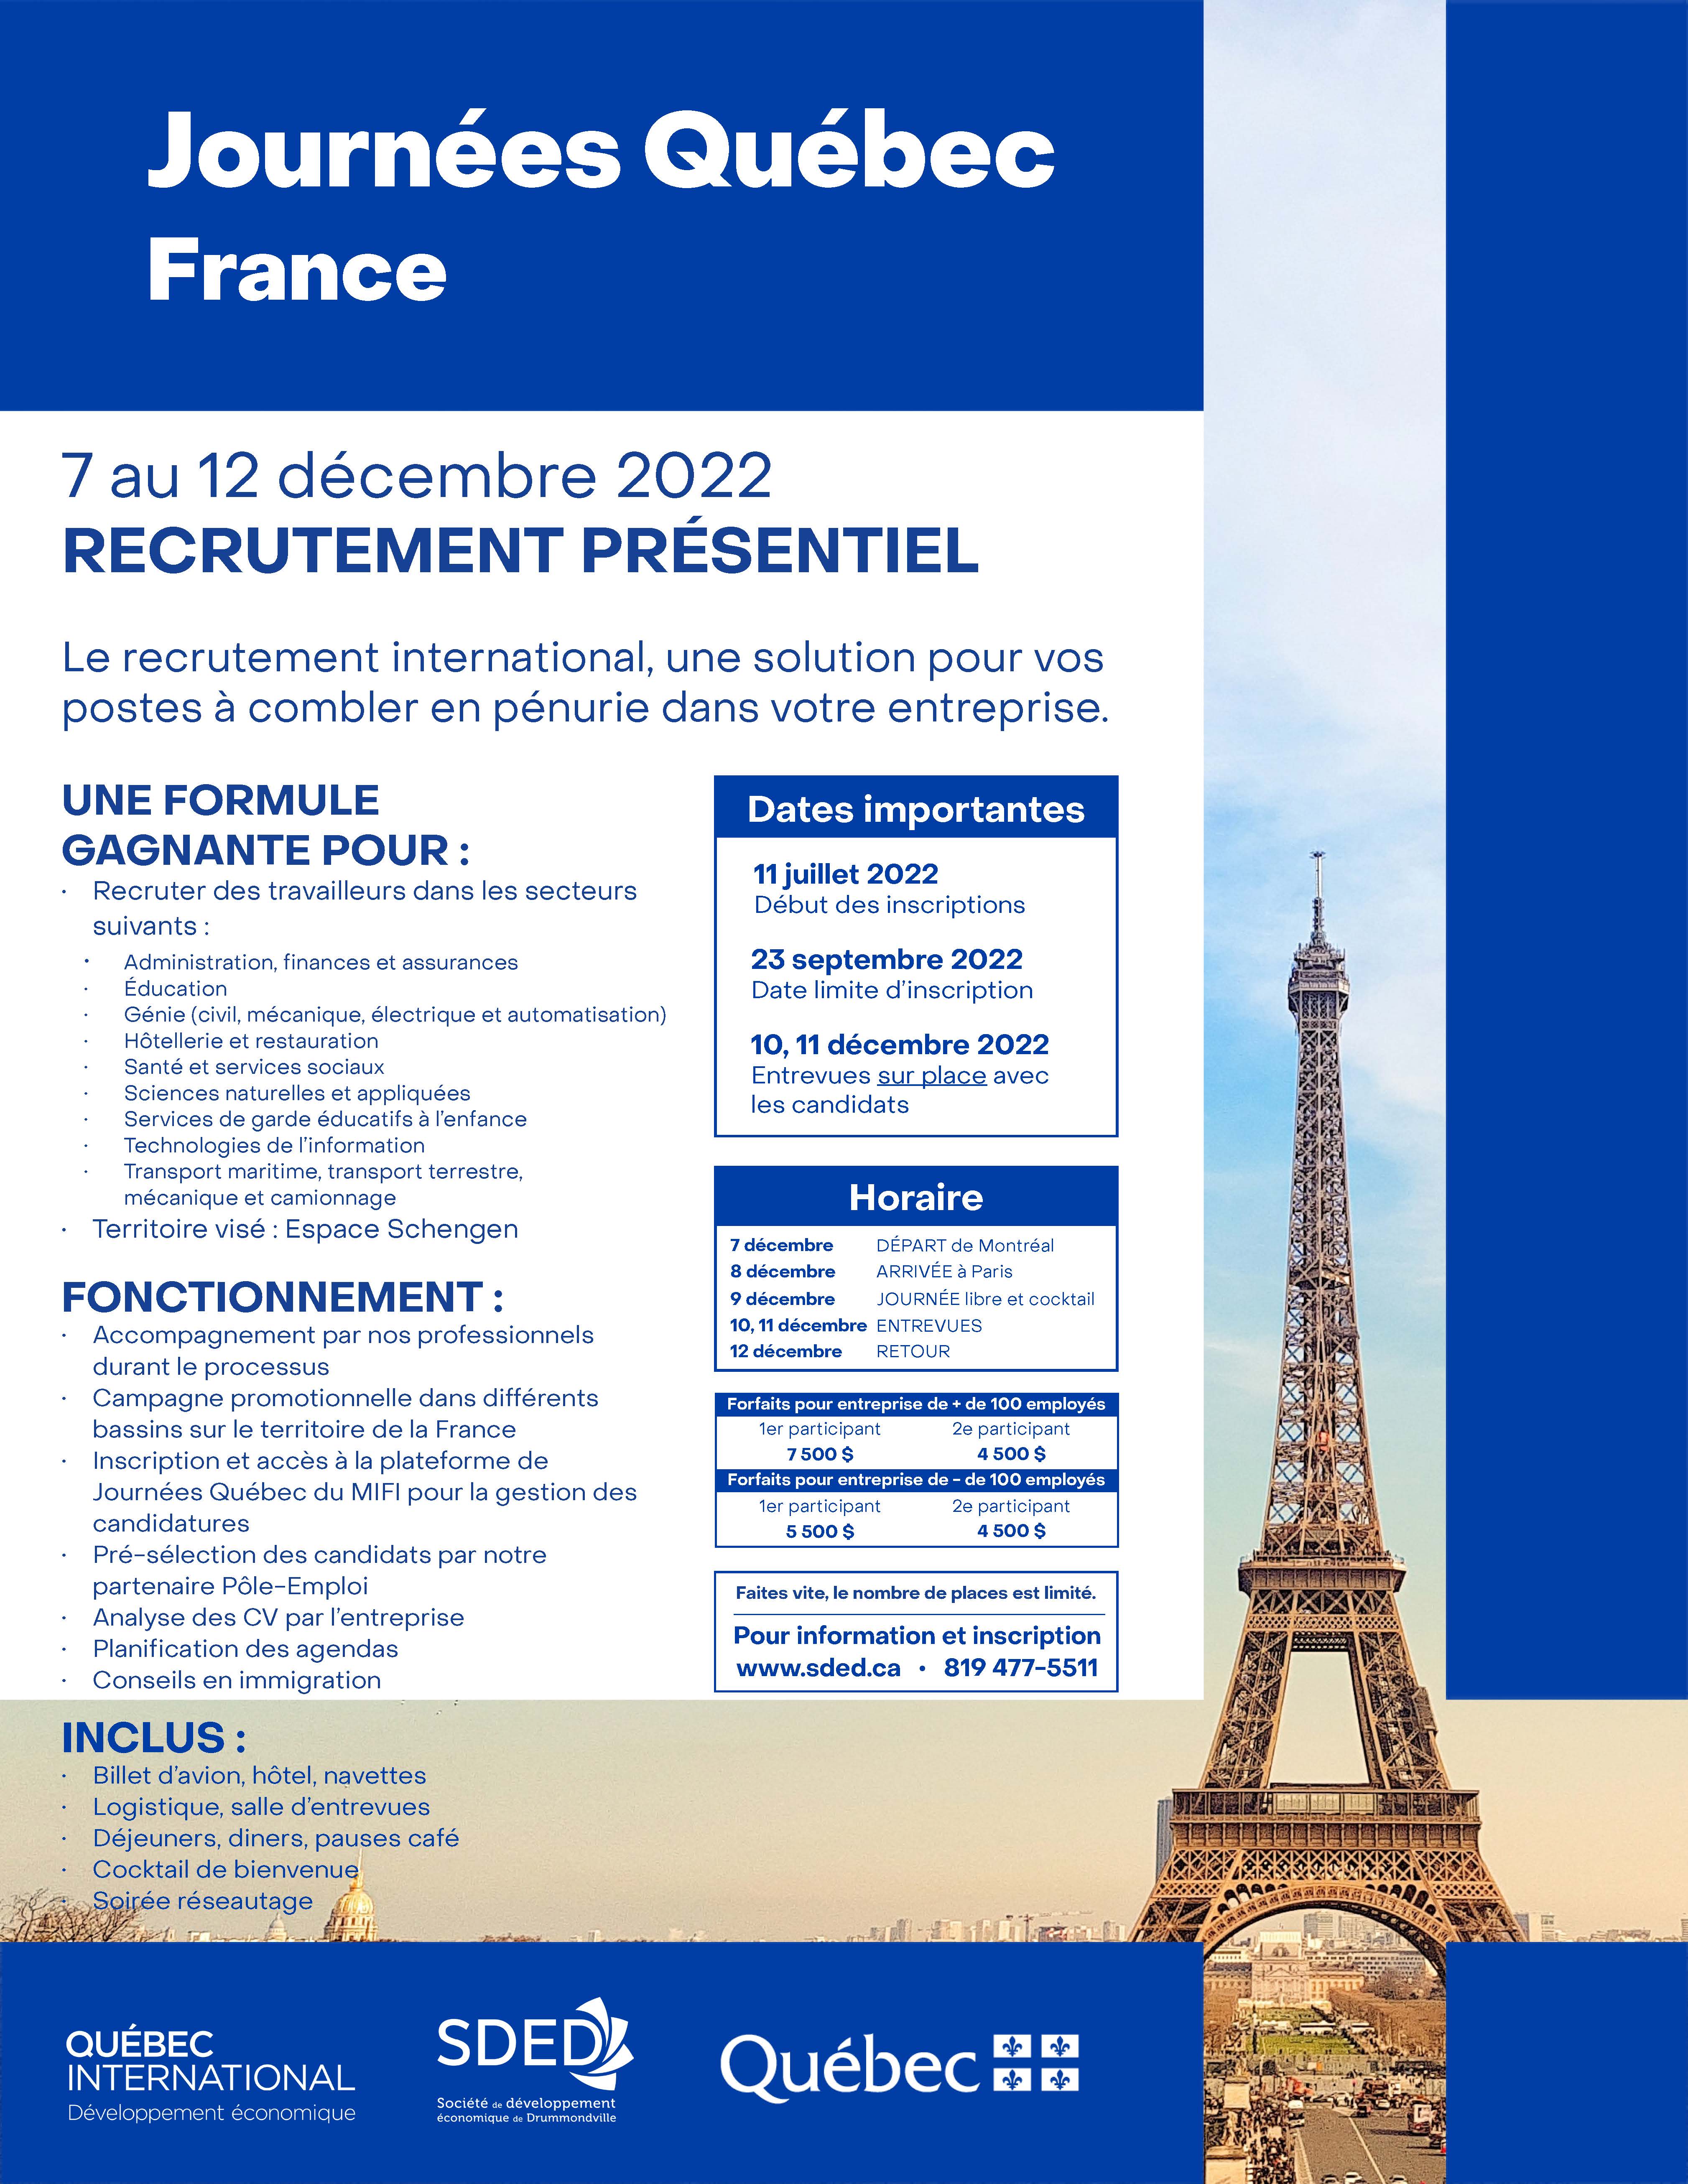 ONE PAGER JQ France 2022